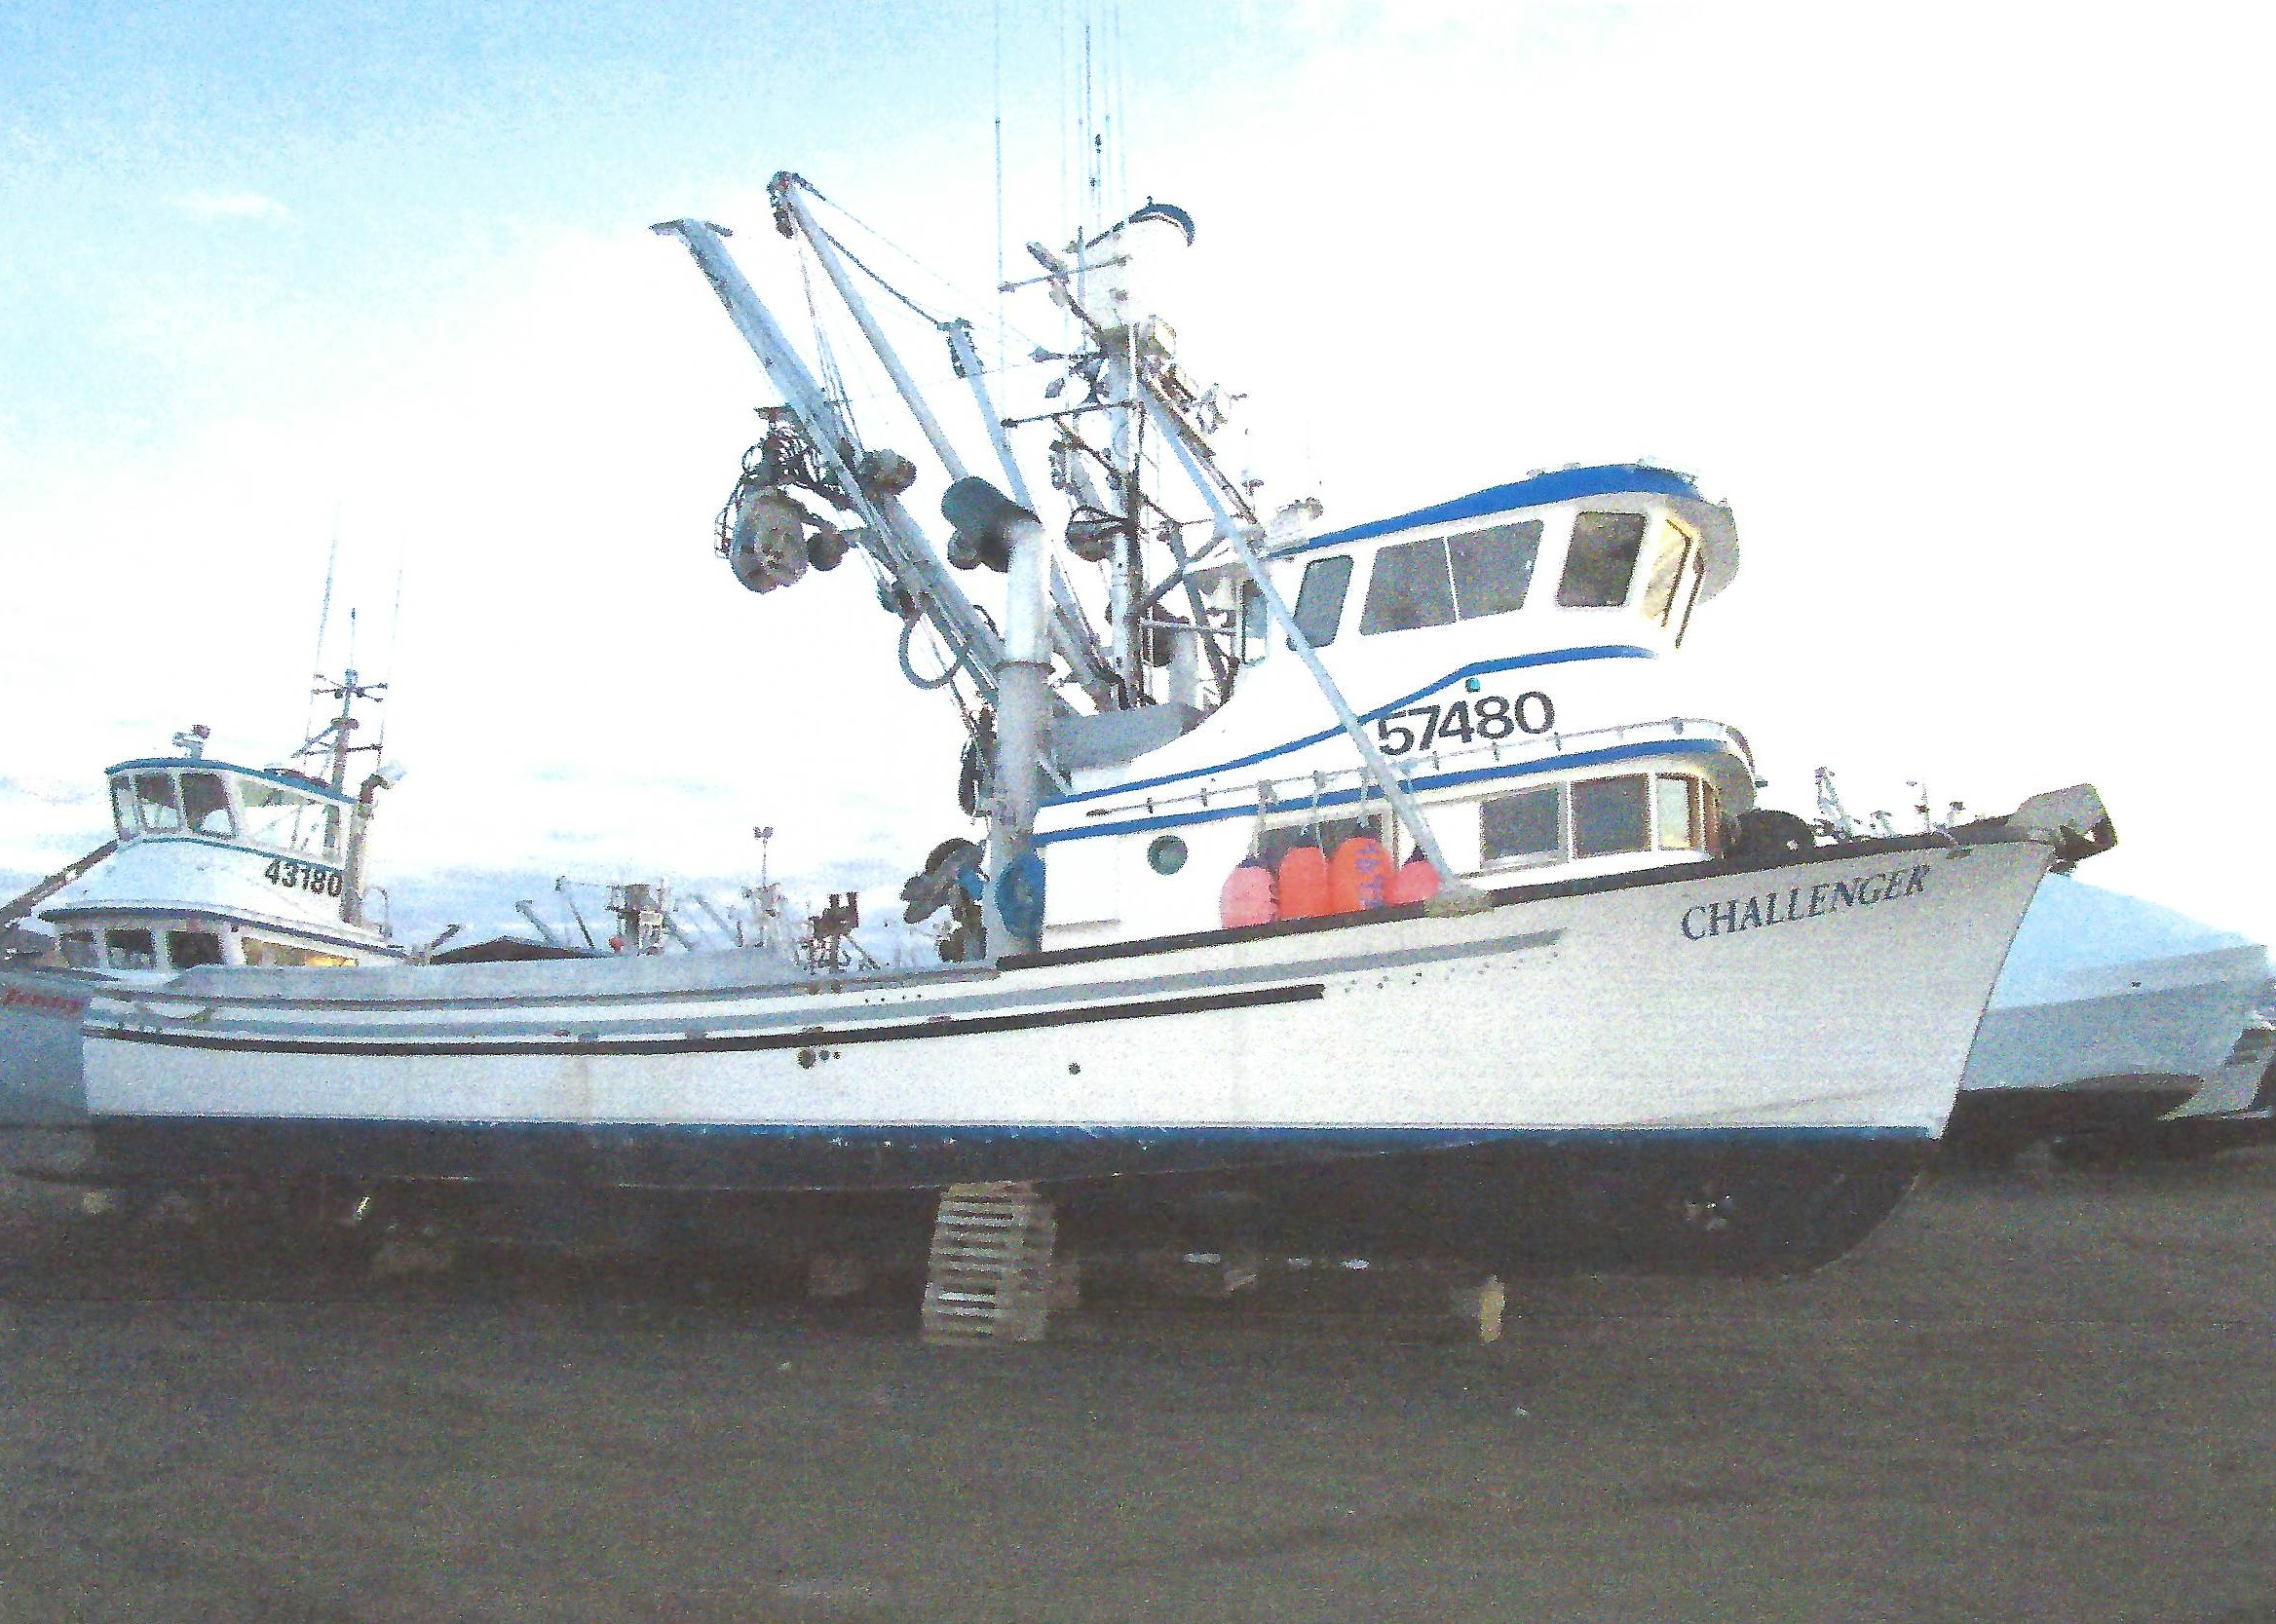 Fishing Vessel Challenger before the causalty.